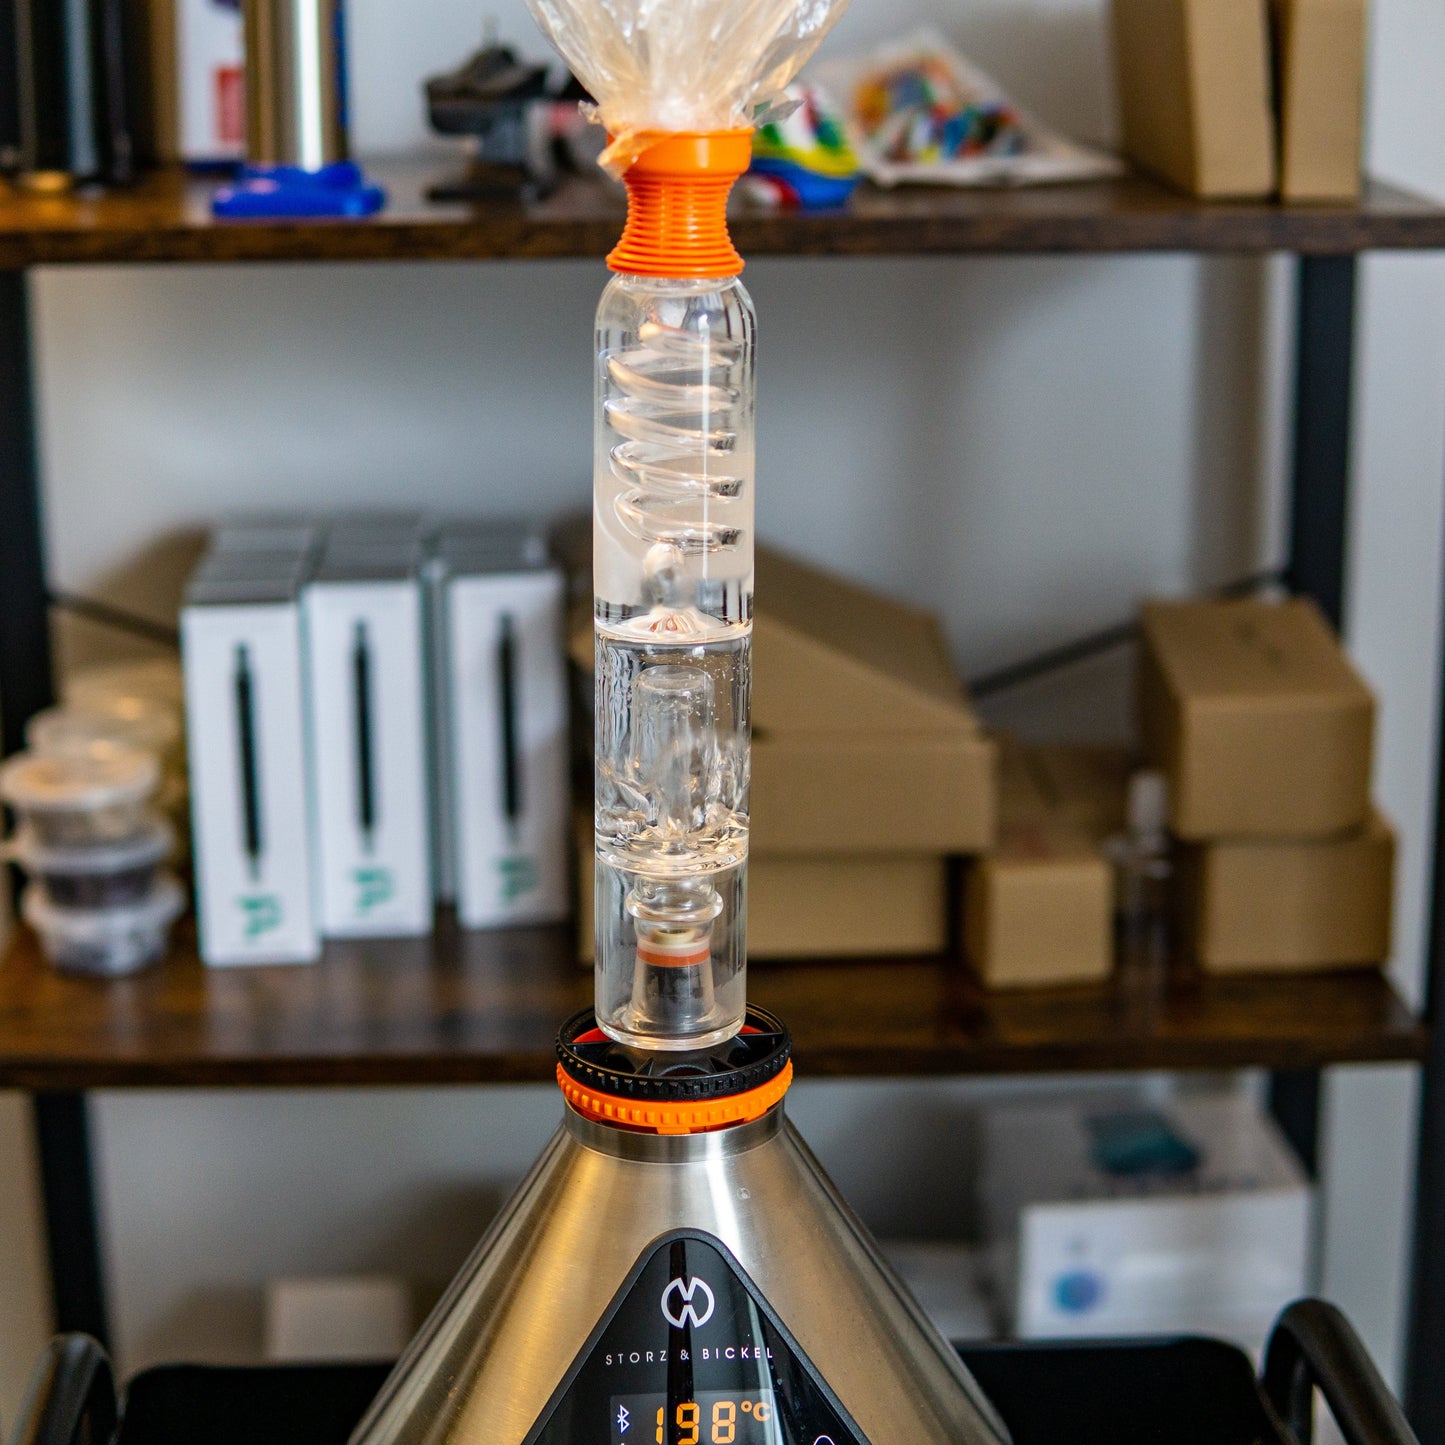 The Glacier Tube - Freeze Coil and Water Bubbler Attachment for the Volcano Hybrid